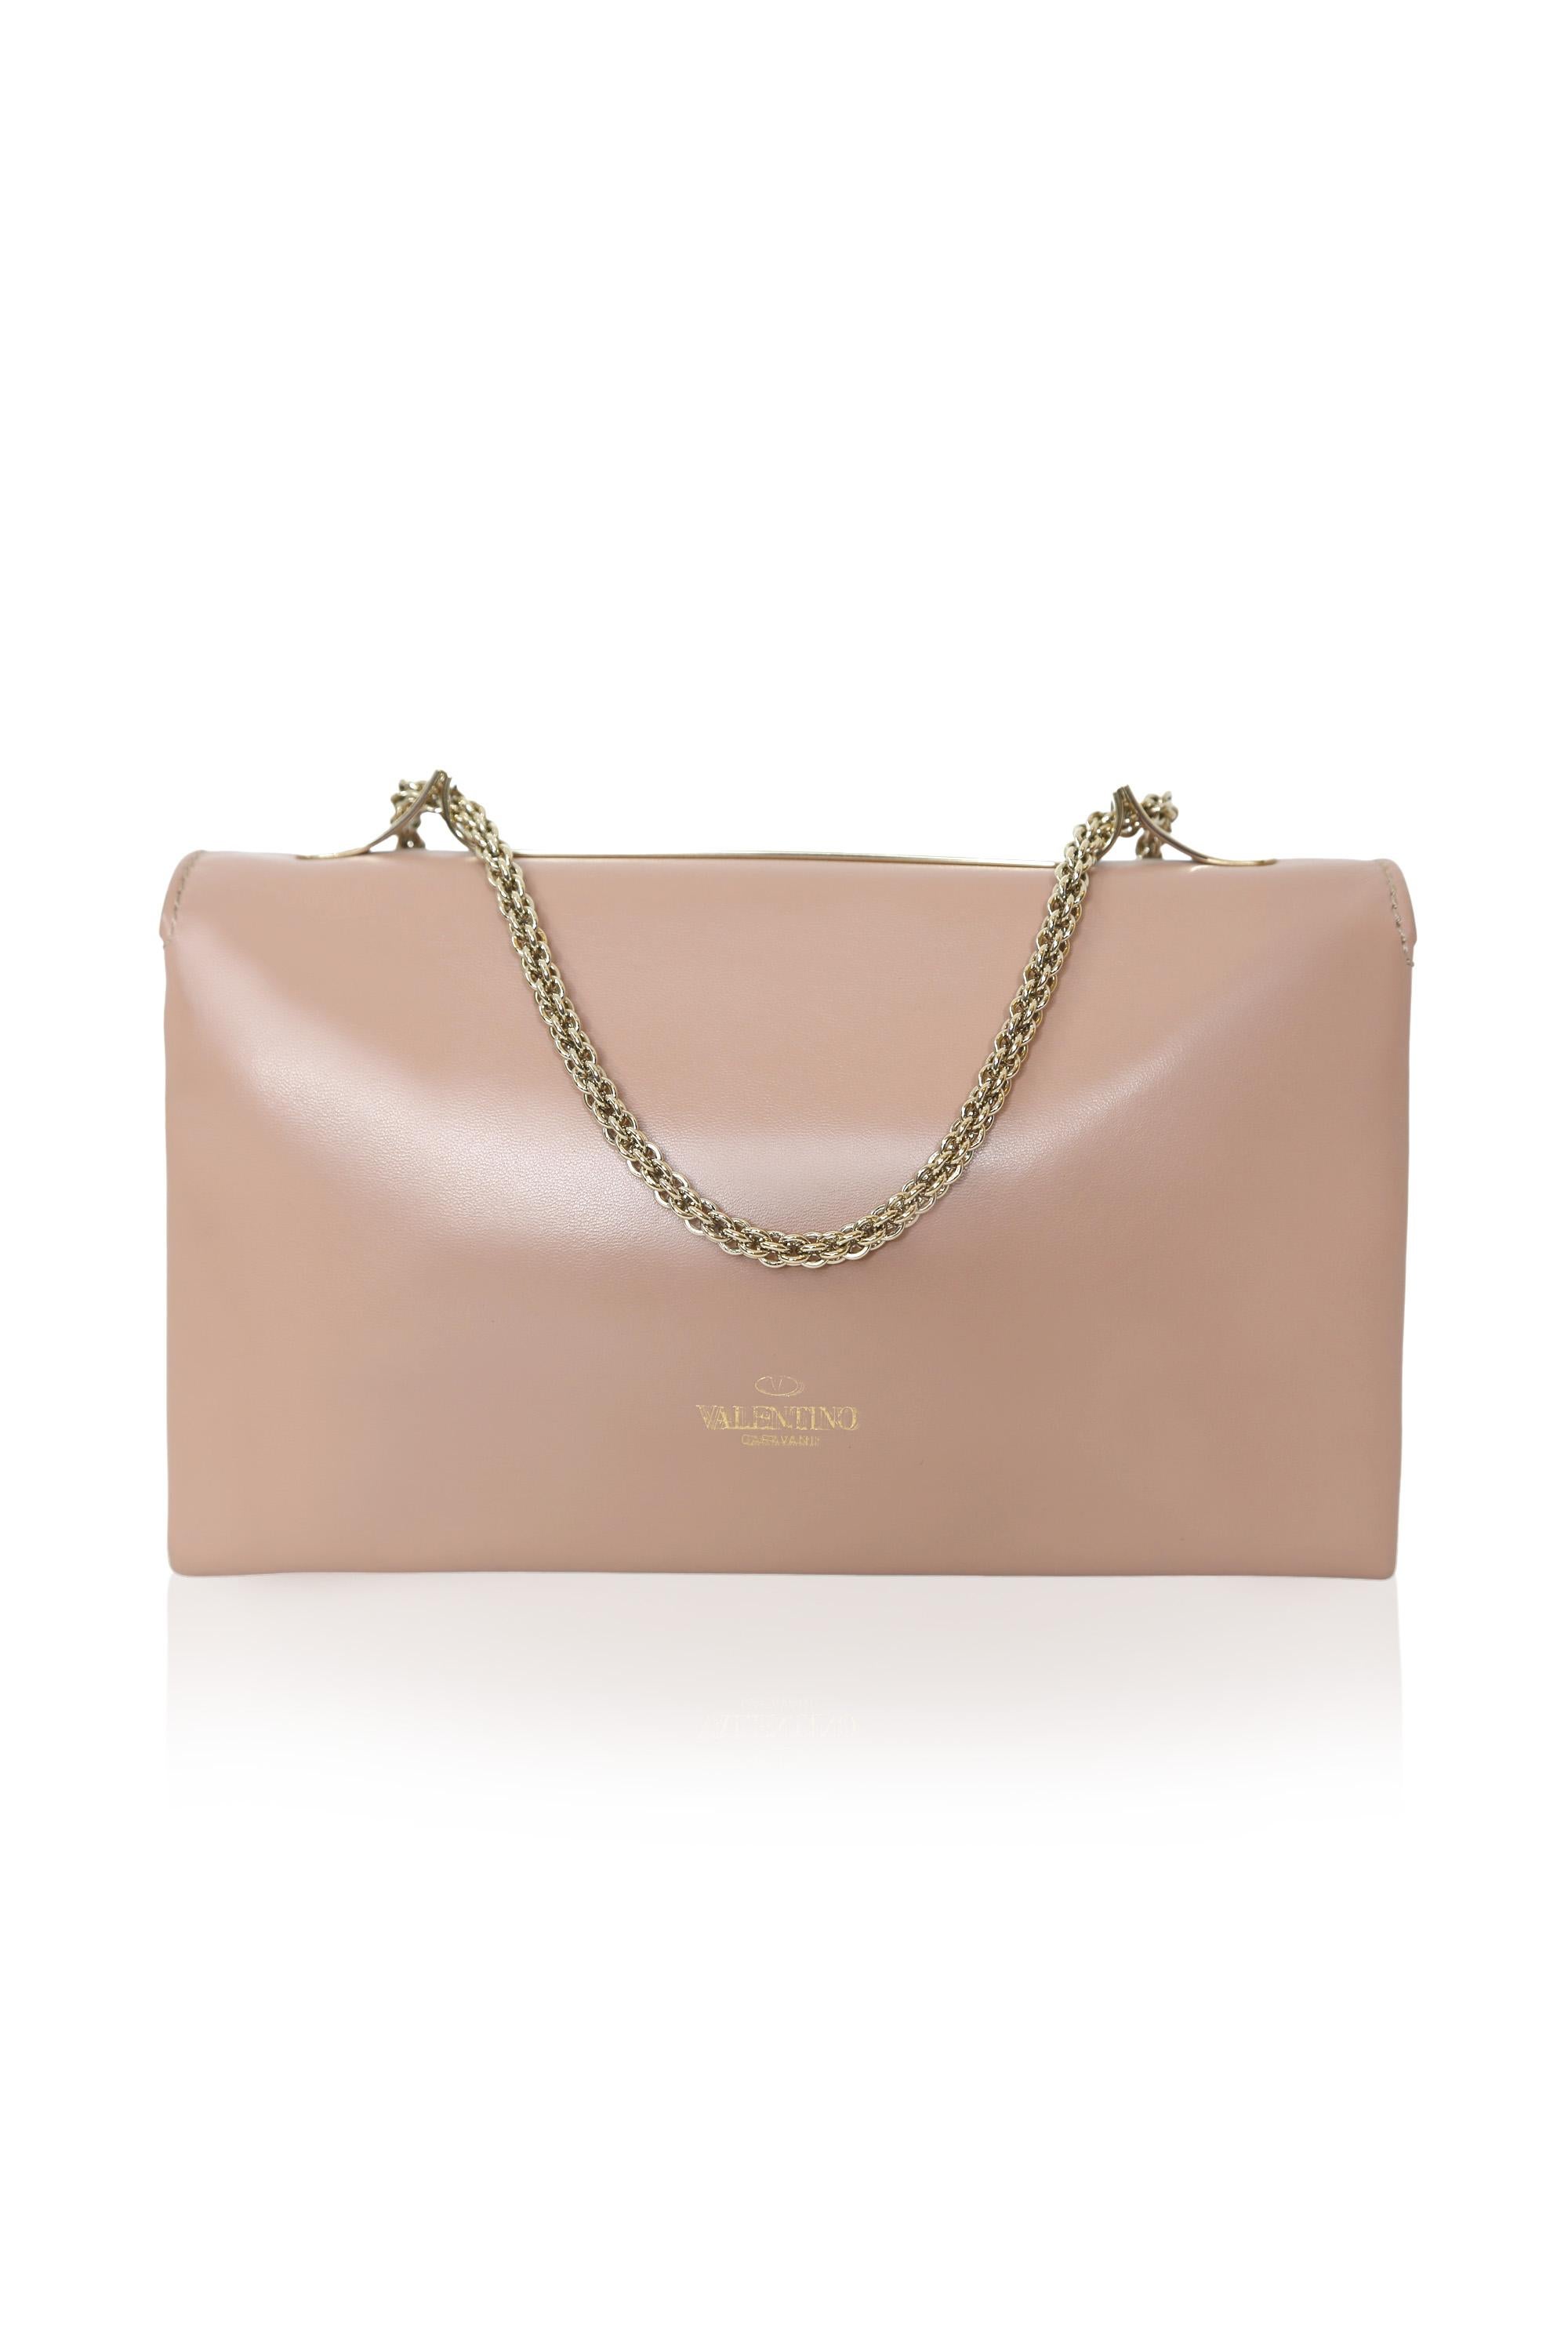 The Valentino Vavavoom Crossbody Bag is a stylish and versatile accessory for any outfit. Its high-quality construction and stunning design make it a must-have for fashion-forward individuals. There are some small scratches on the opening front.